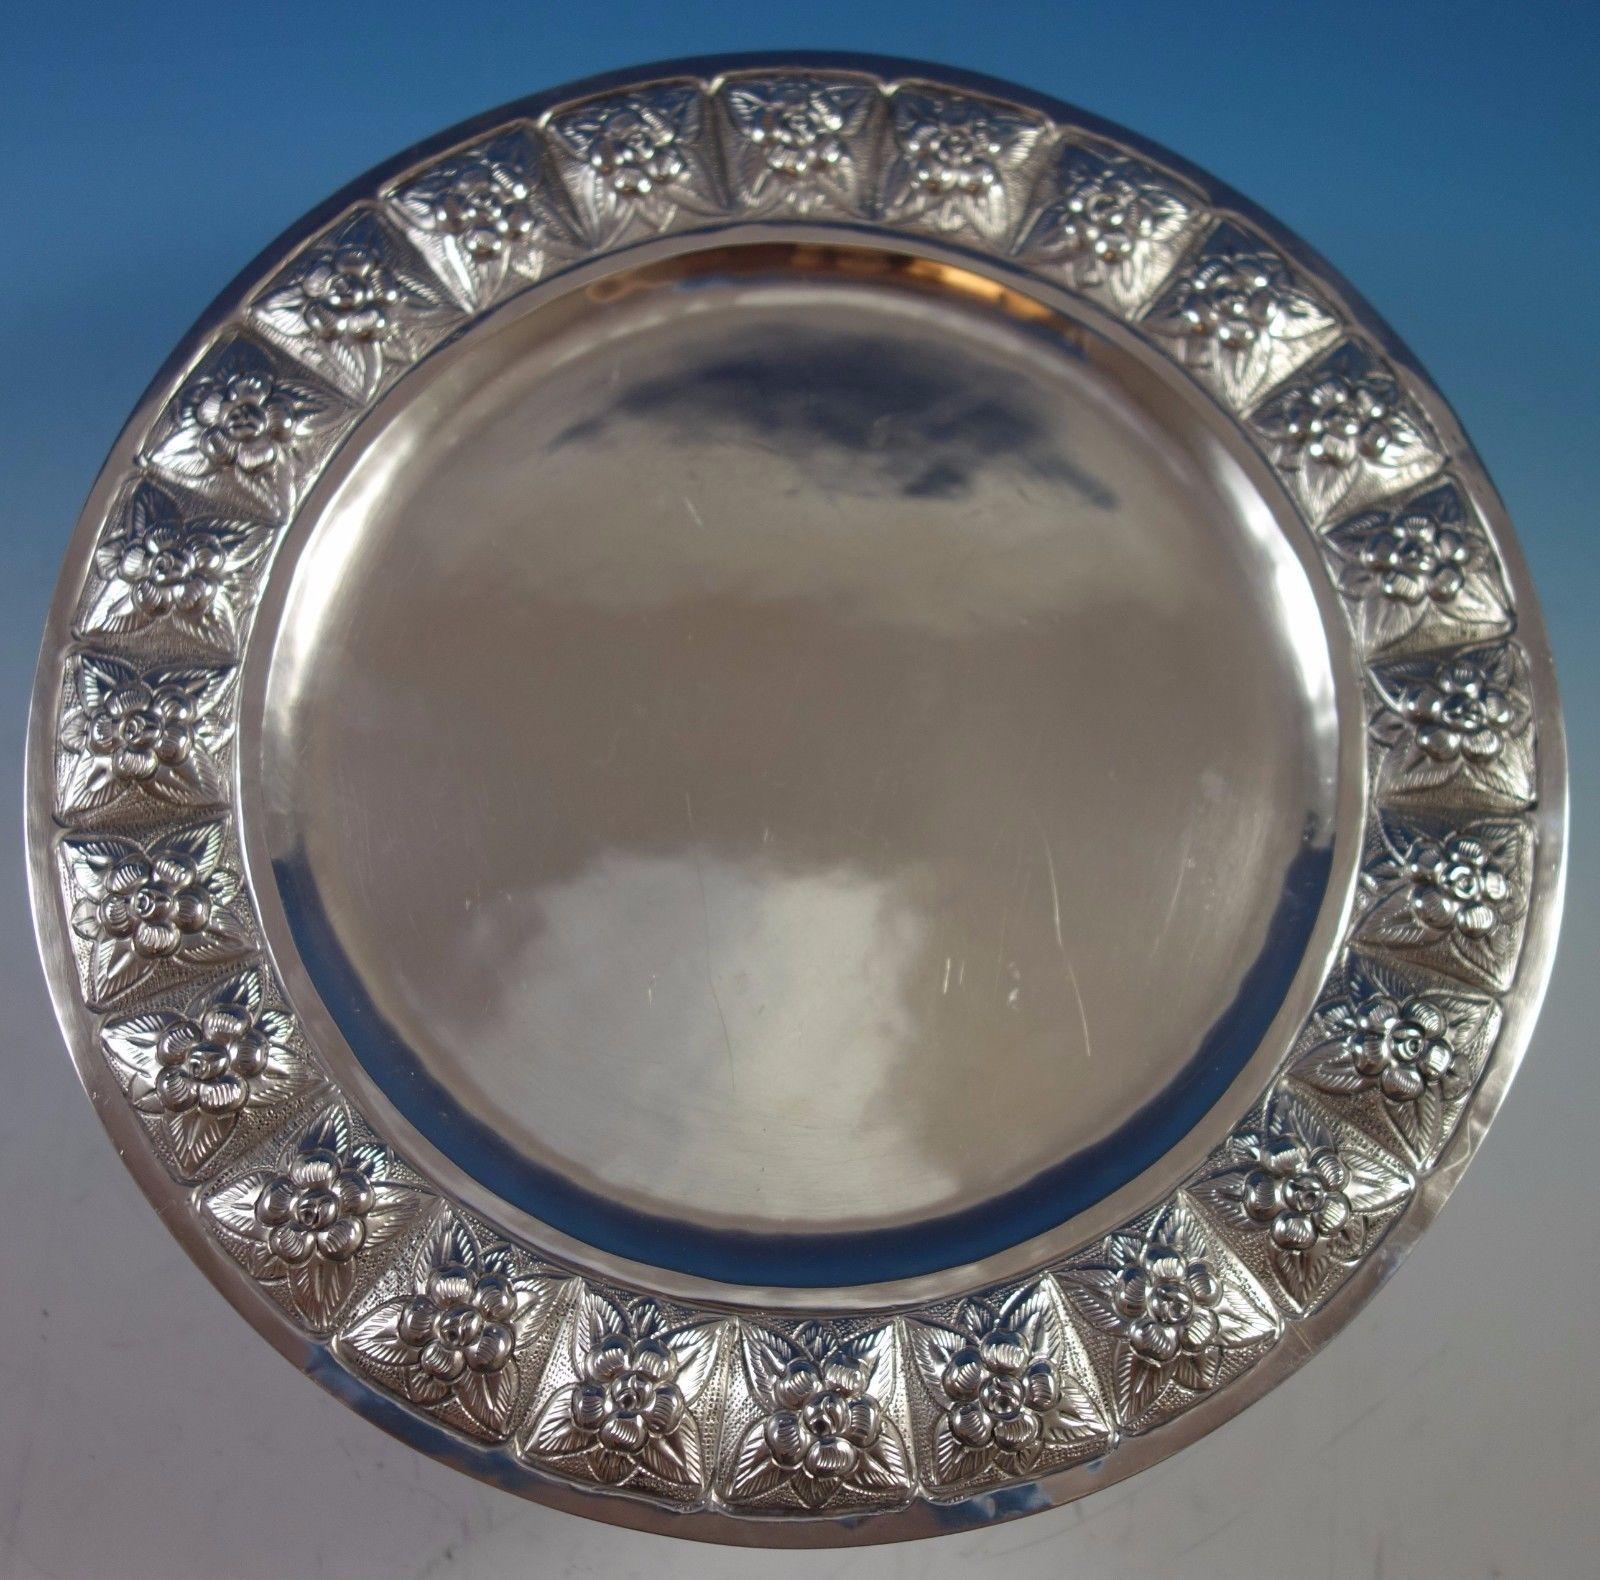 Aztec rose by Sanborns Mexican sterling silver charger plate. The plate measures 1/4